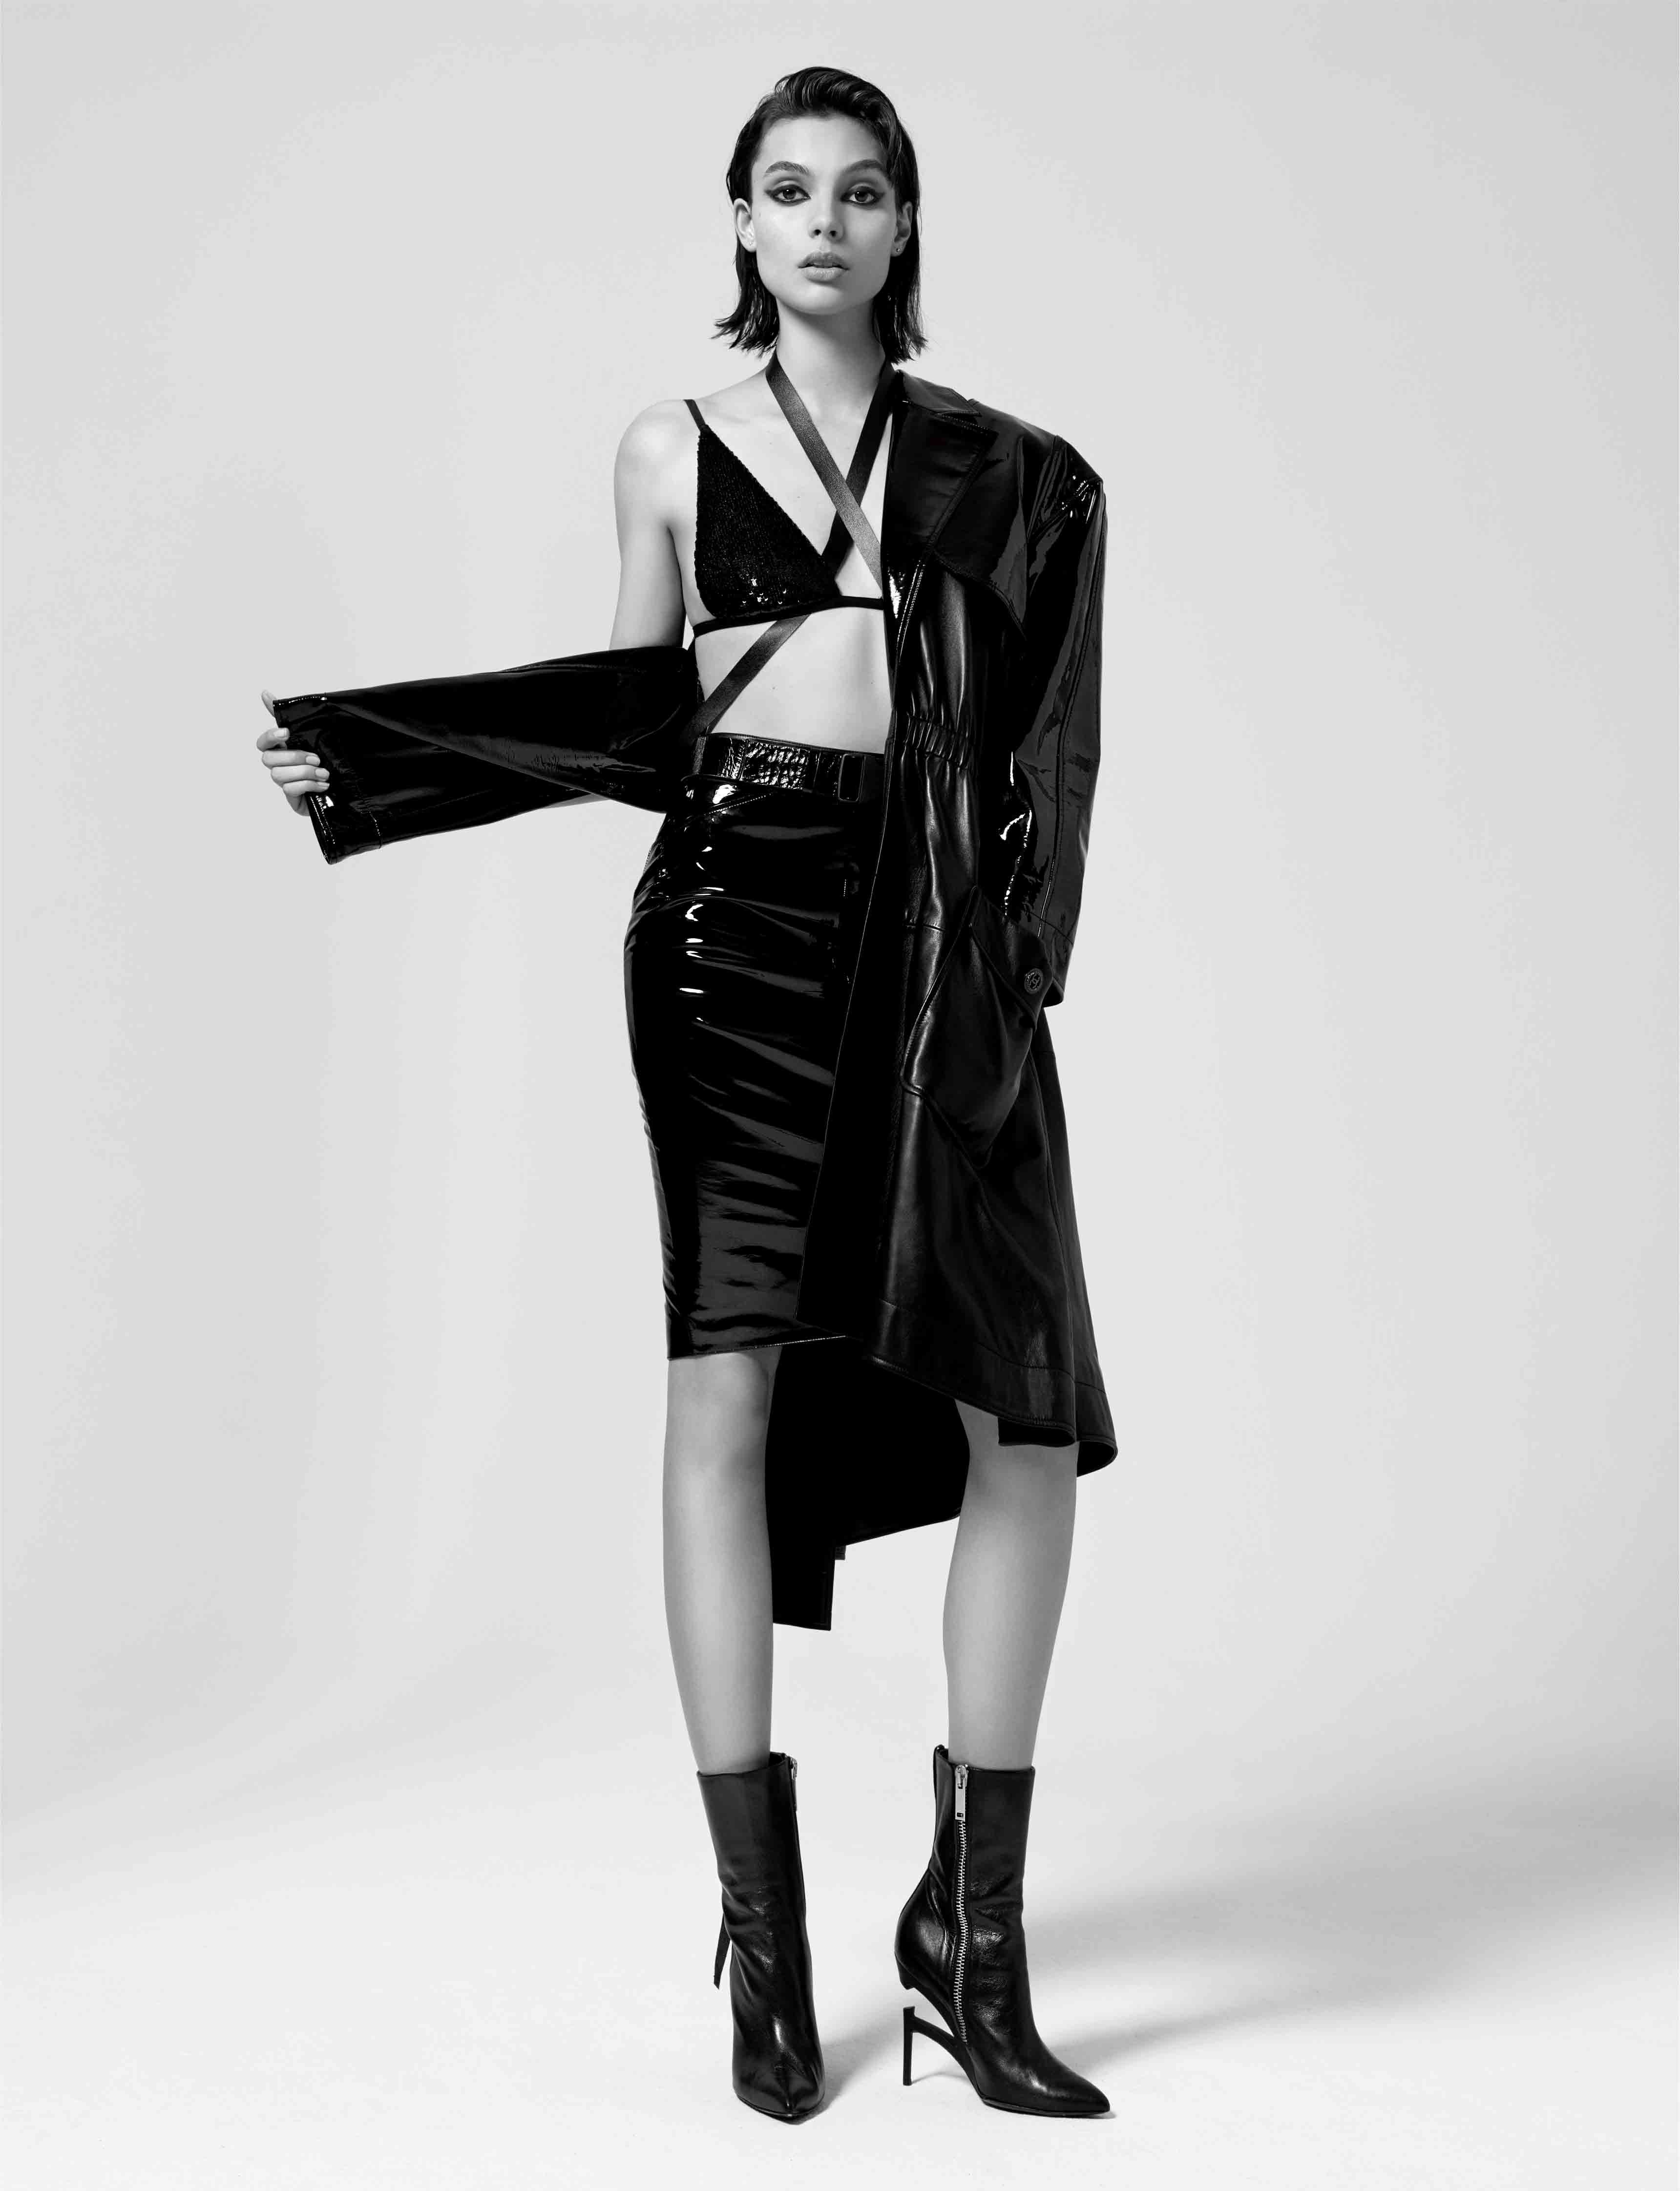 Patent leather trench coat and skirt, CHANEL. Bra, ALTUZARRA. Leather straps, MOKUBA. Boots, UNRAVEL.